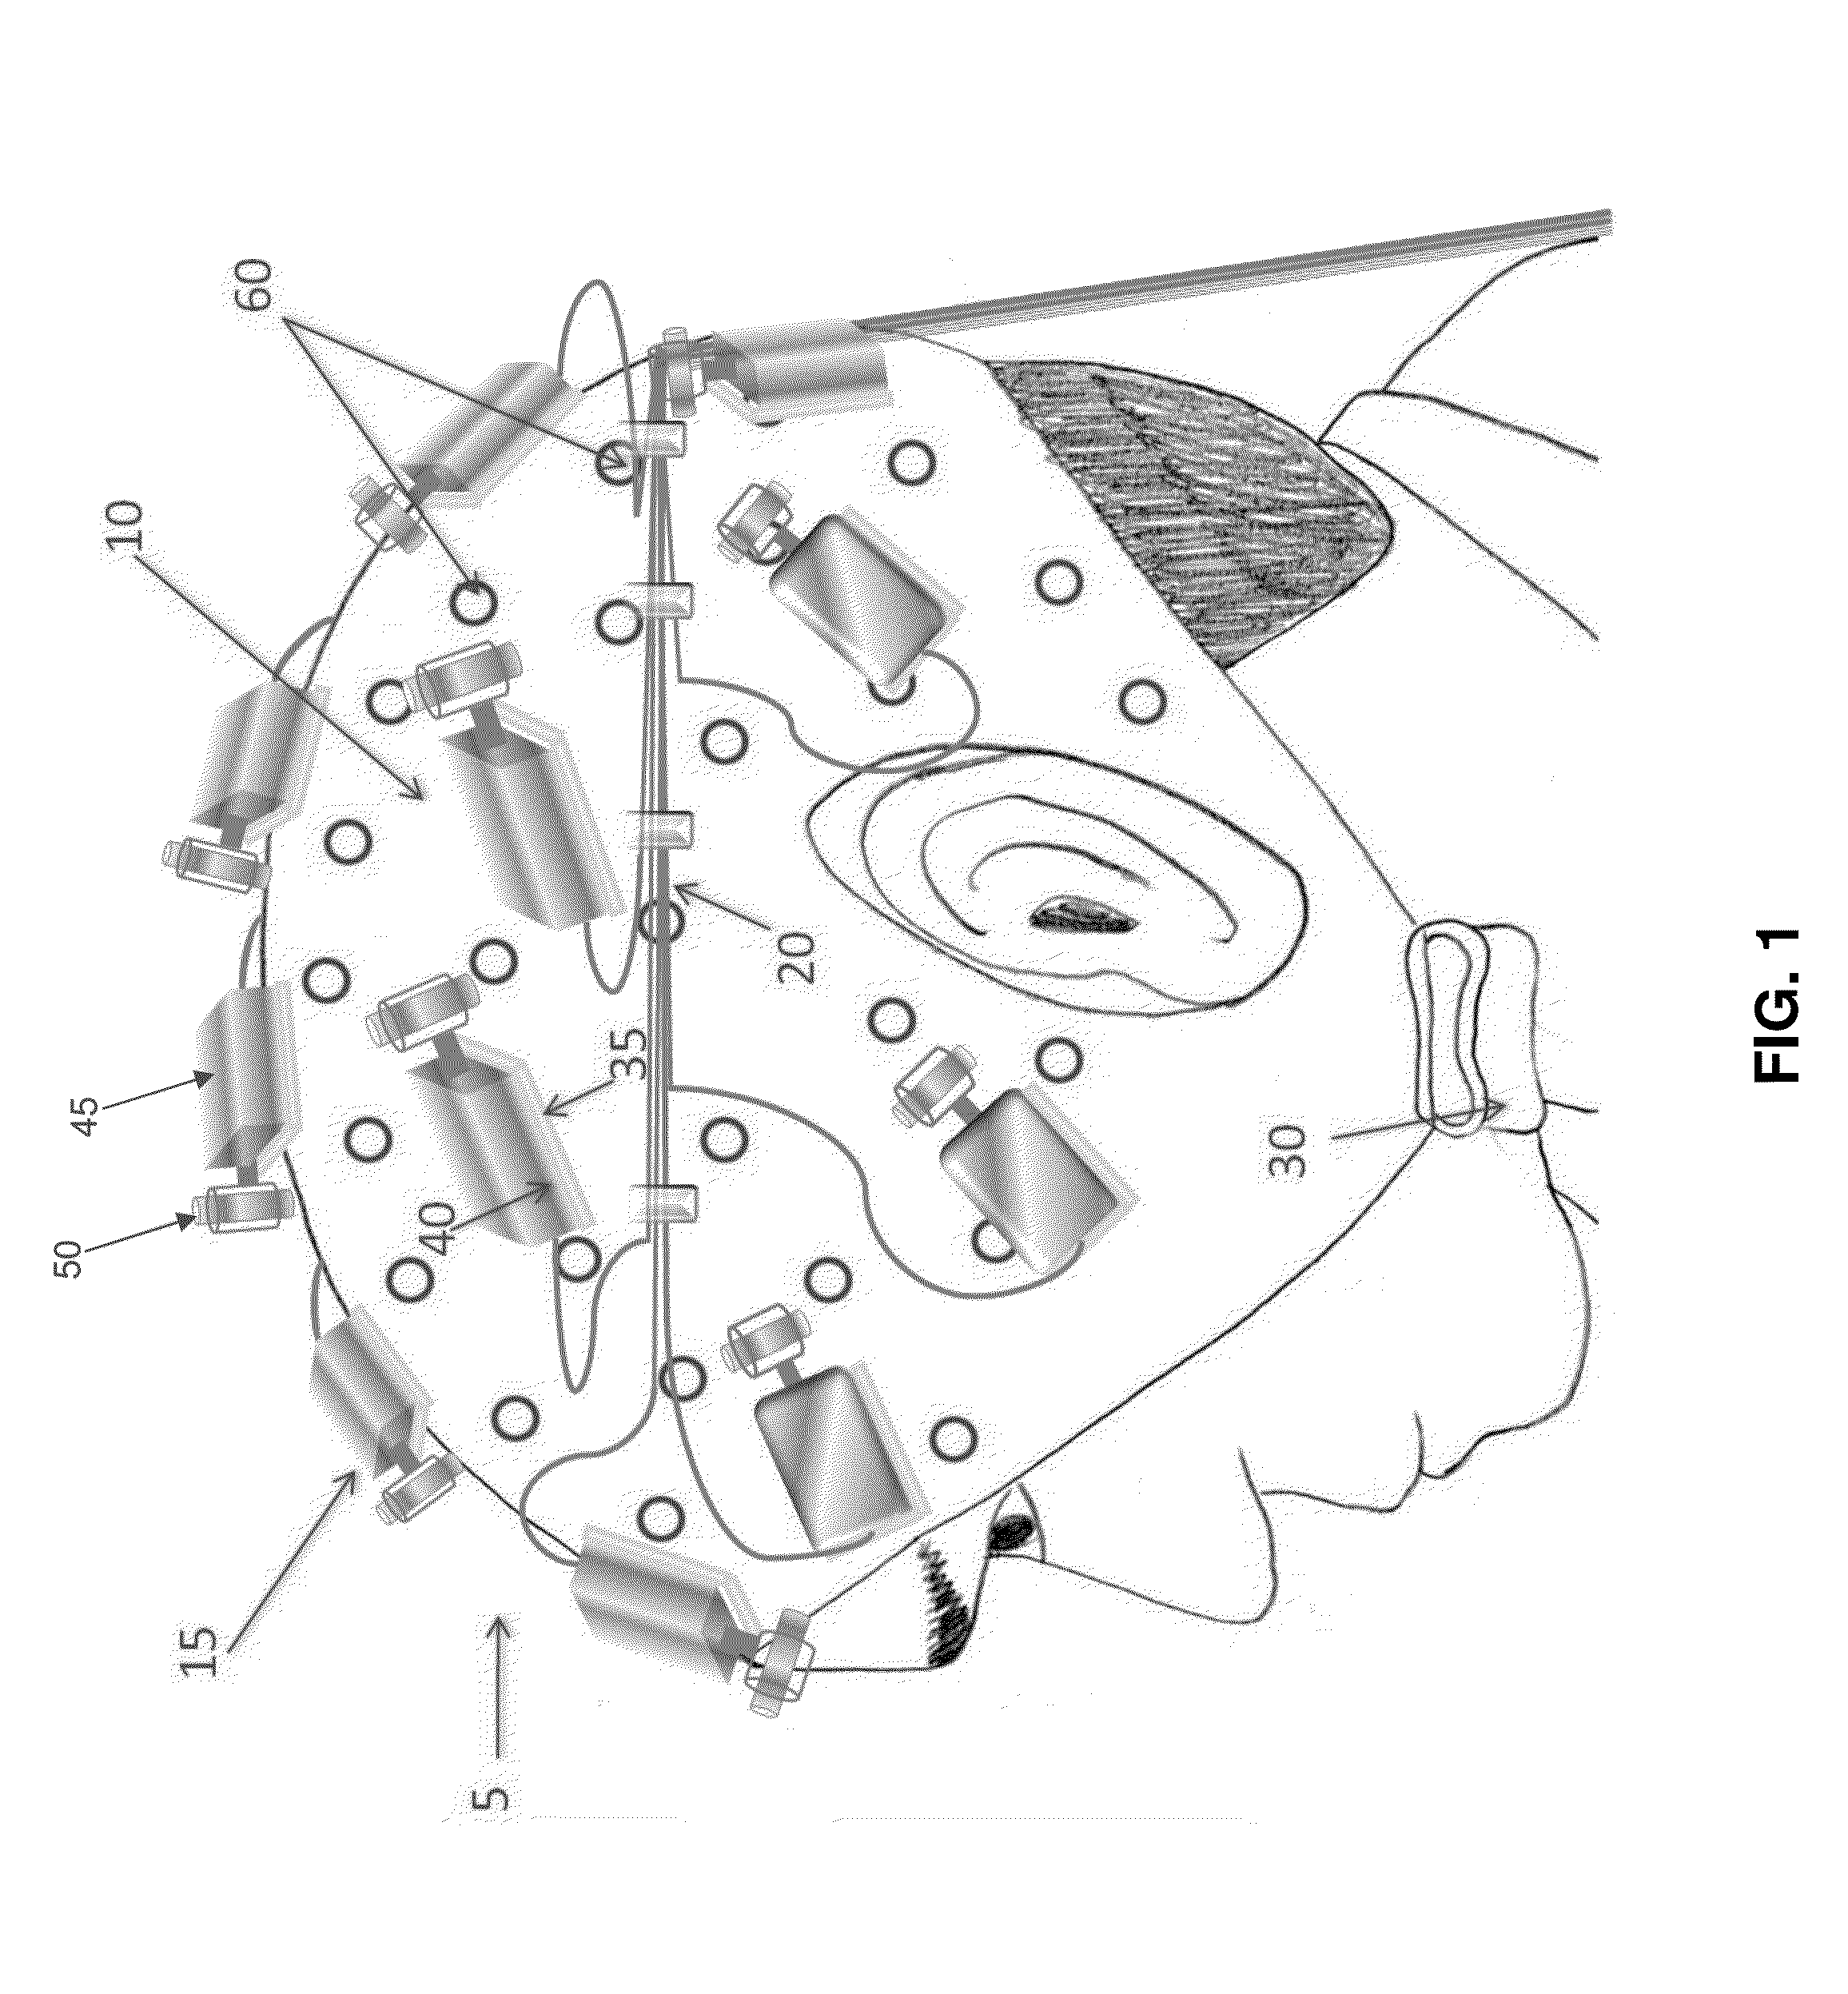 Method and apparatus for providing transcranial magnetic stimulation (TMS) to a patient